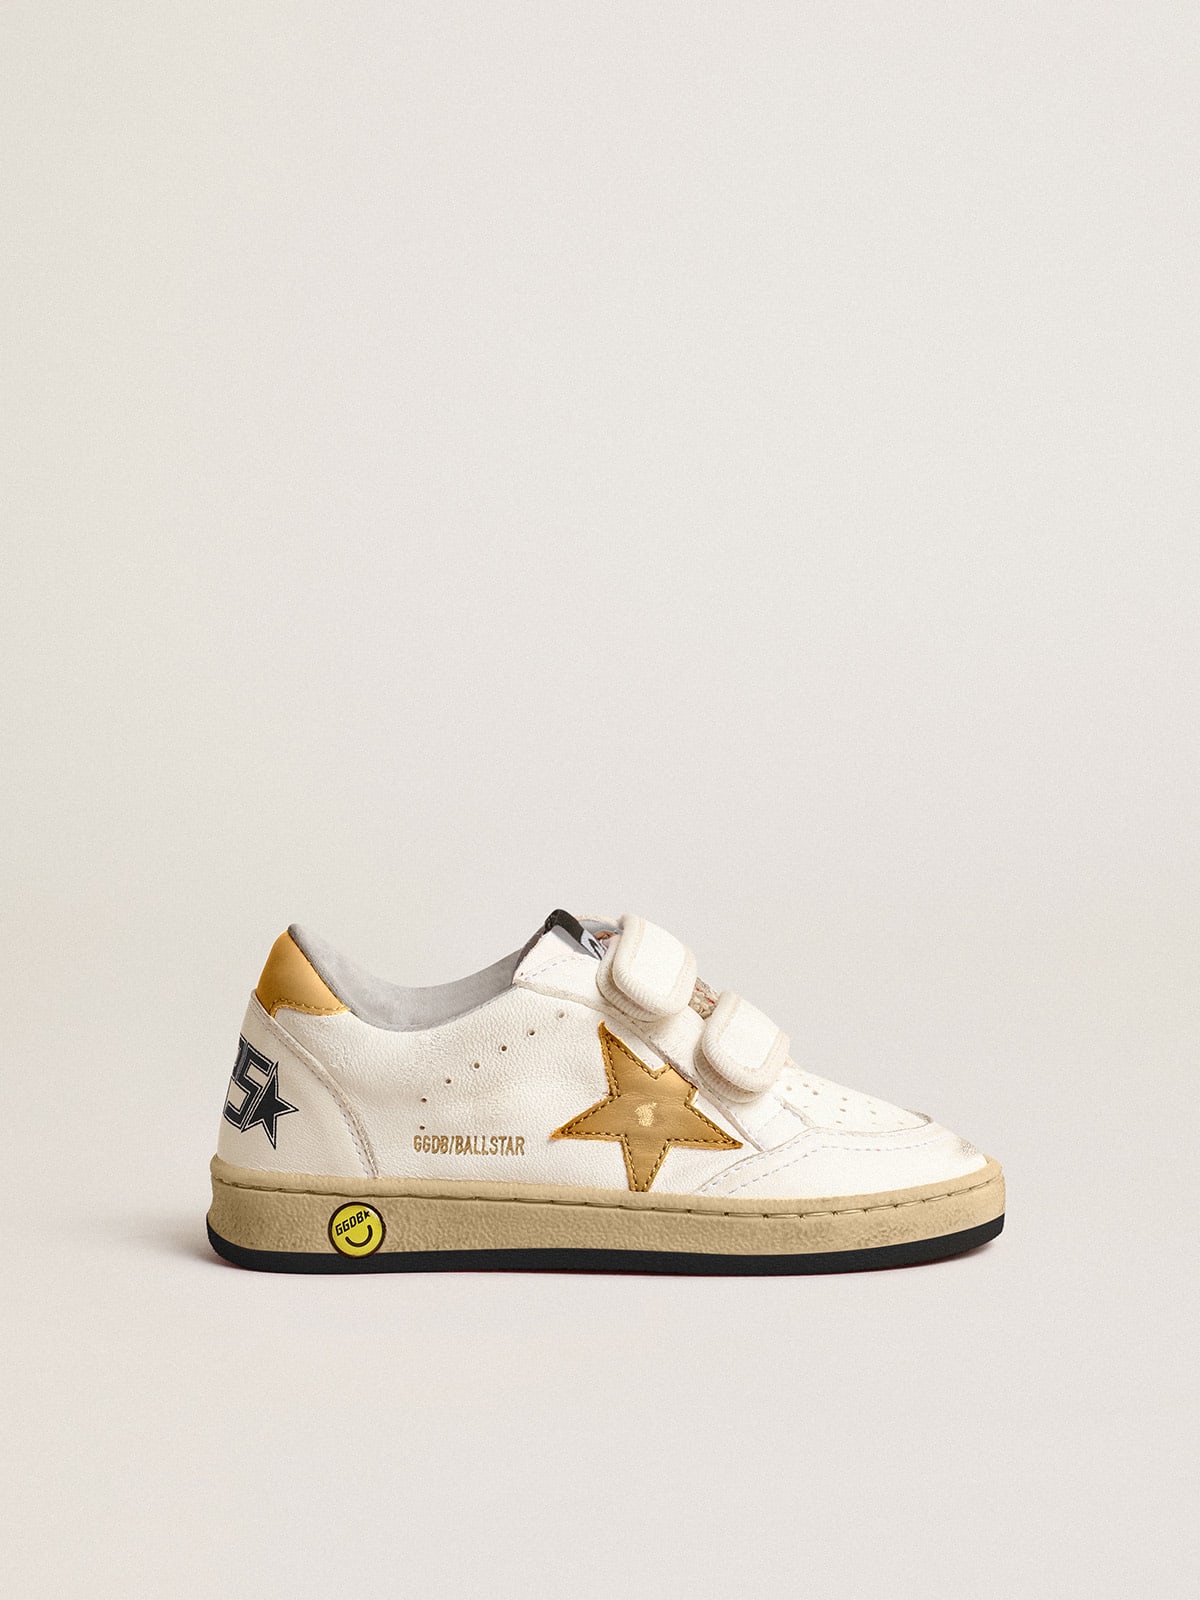 Ball Star Young with gold metallic leather star and heel tab